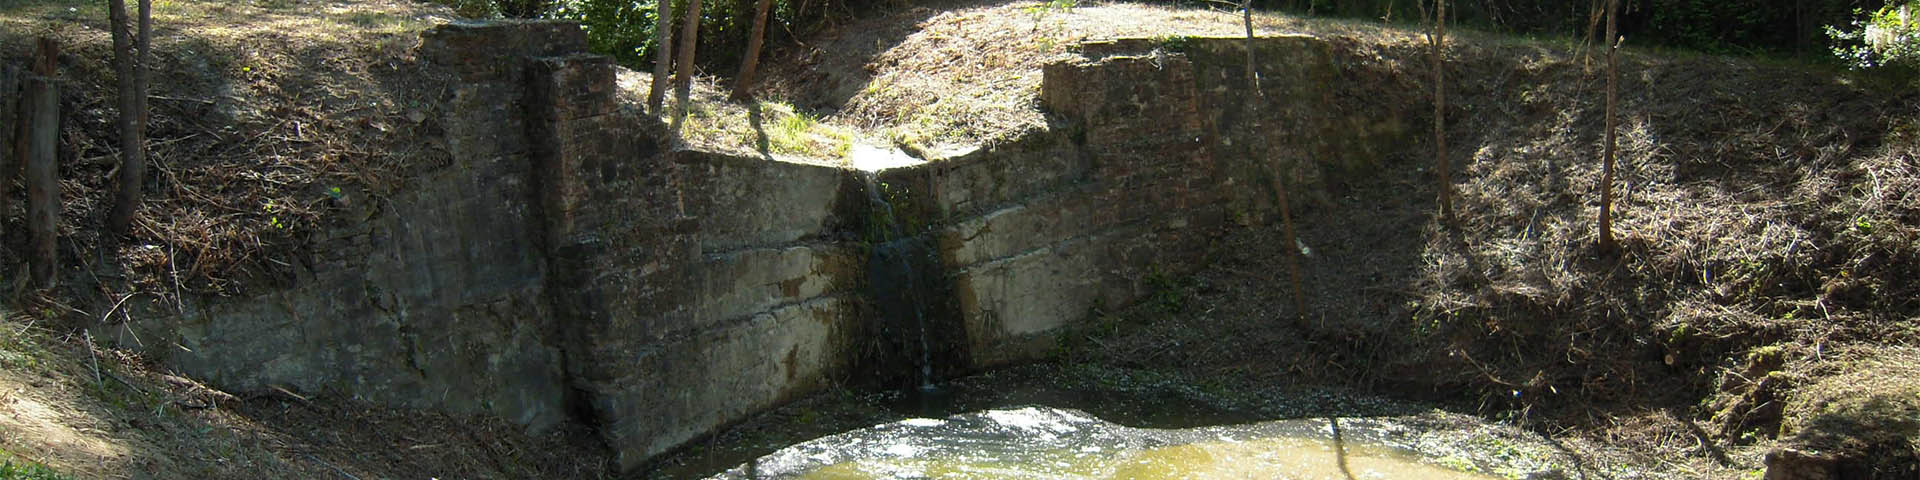 Weir of the Agliena